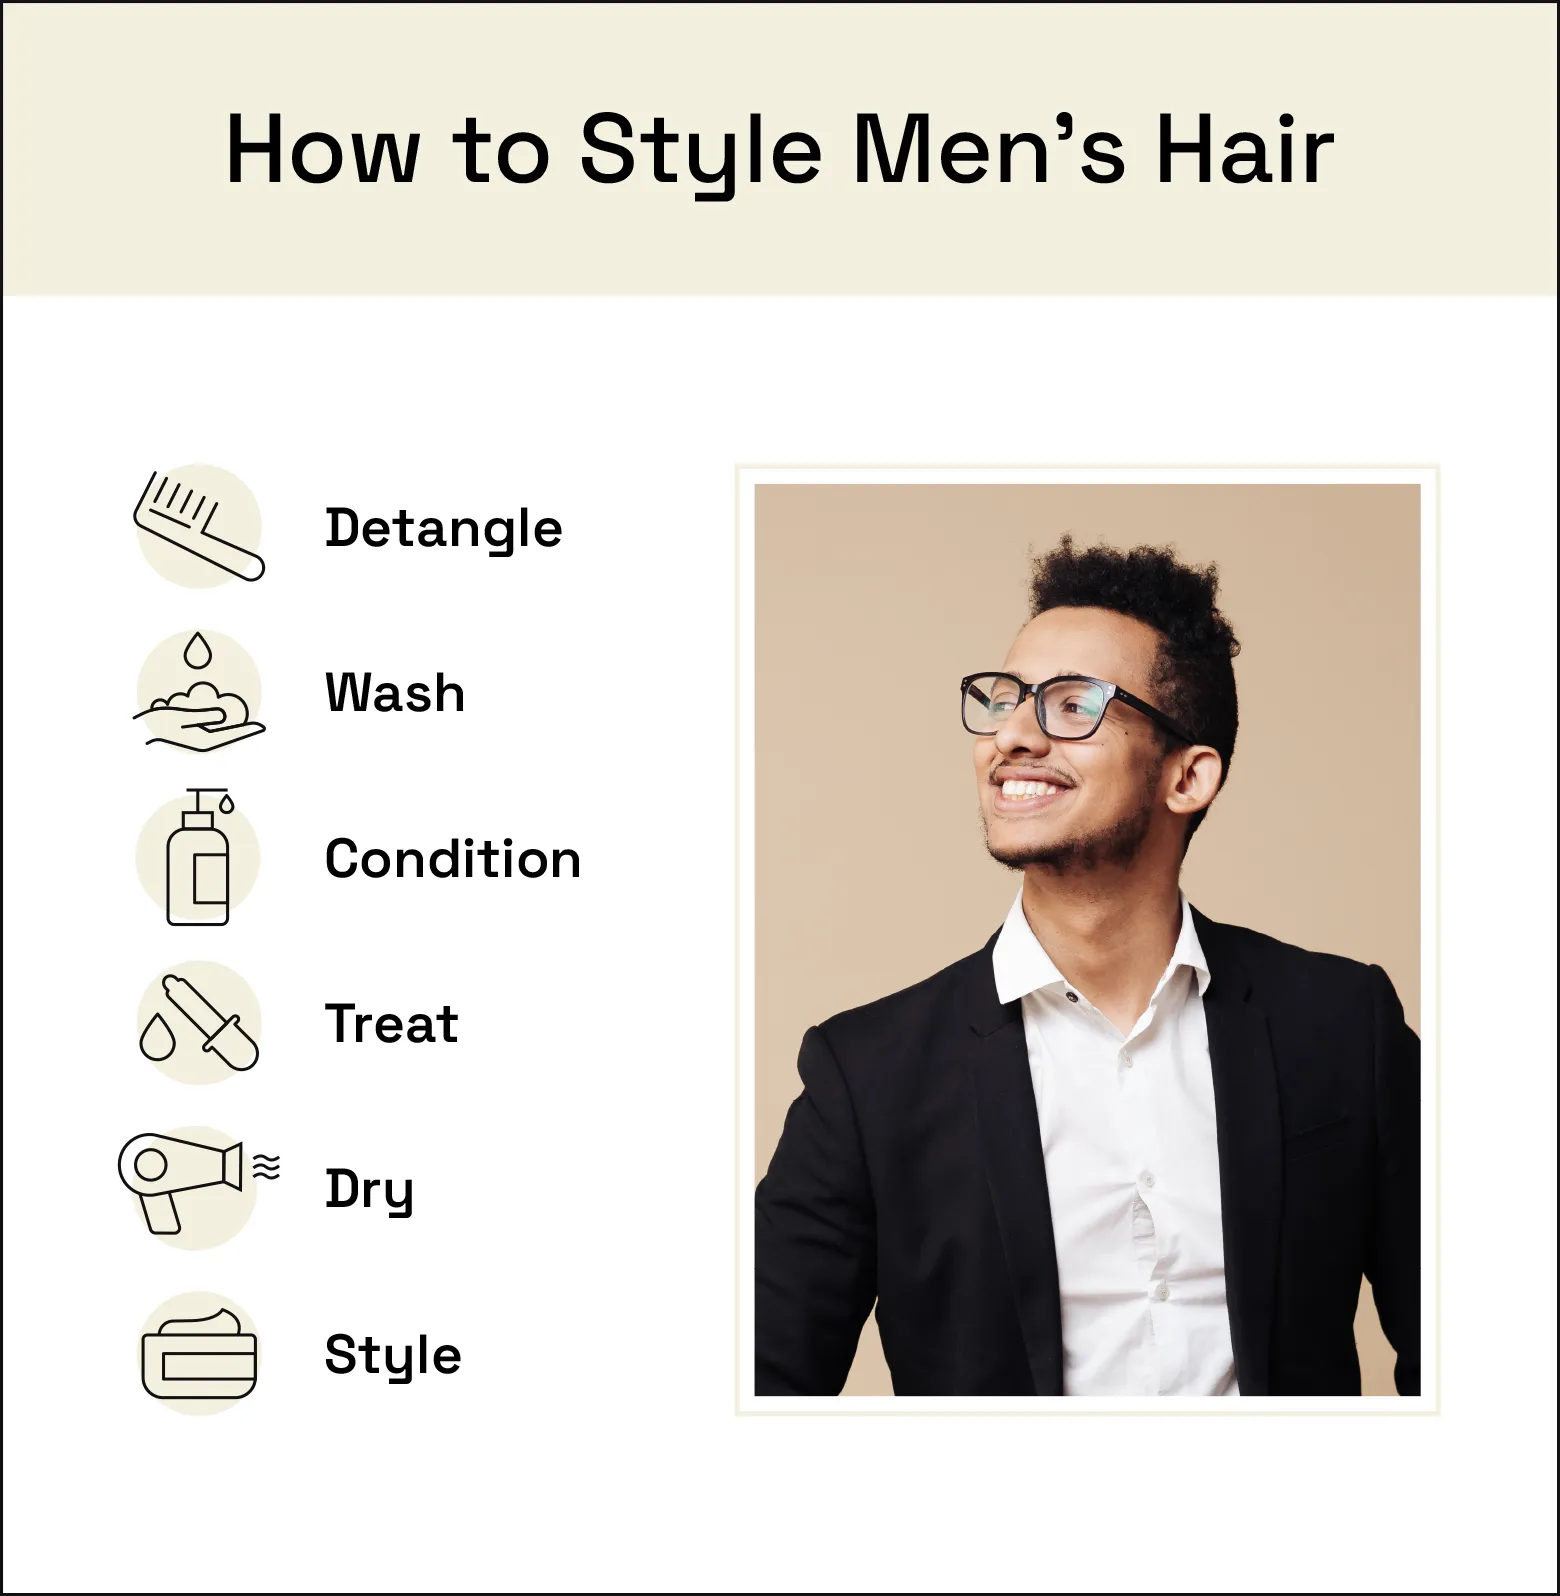 How To Style Men's Hair- StyleSeat